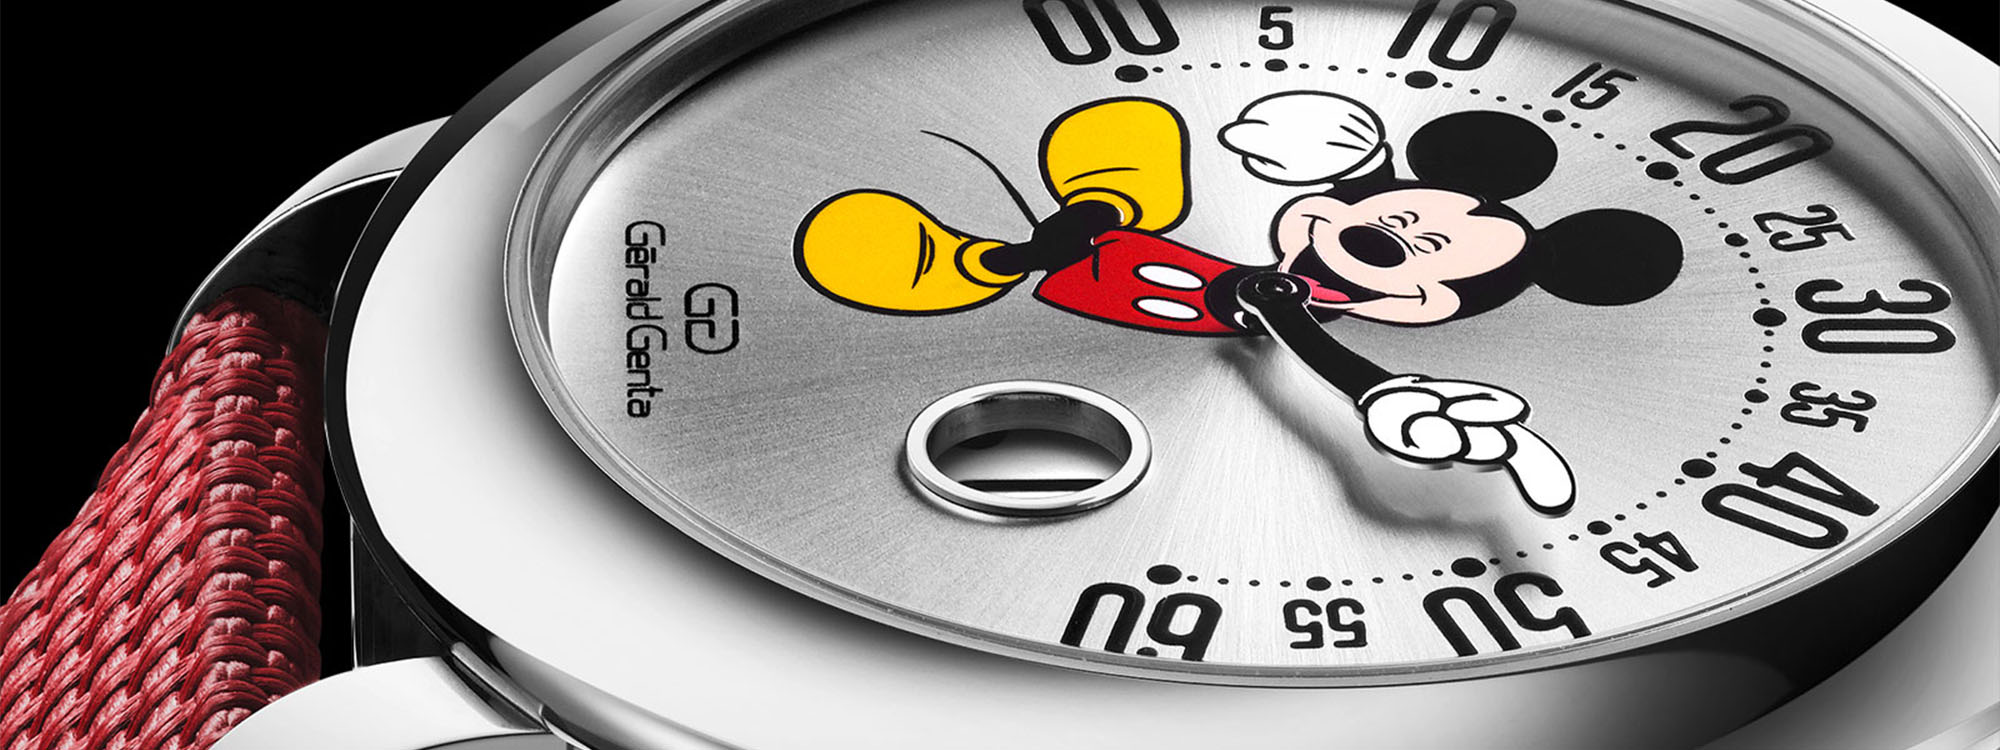 Watches with Mickey Mouse Dials: History and Highlights from 1933 to Today